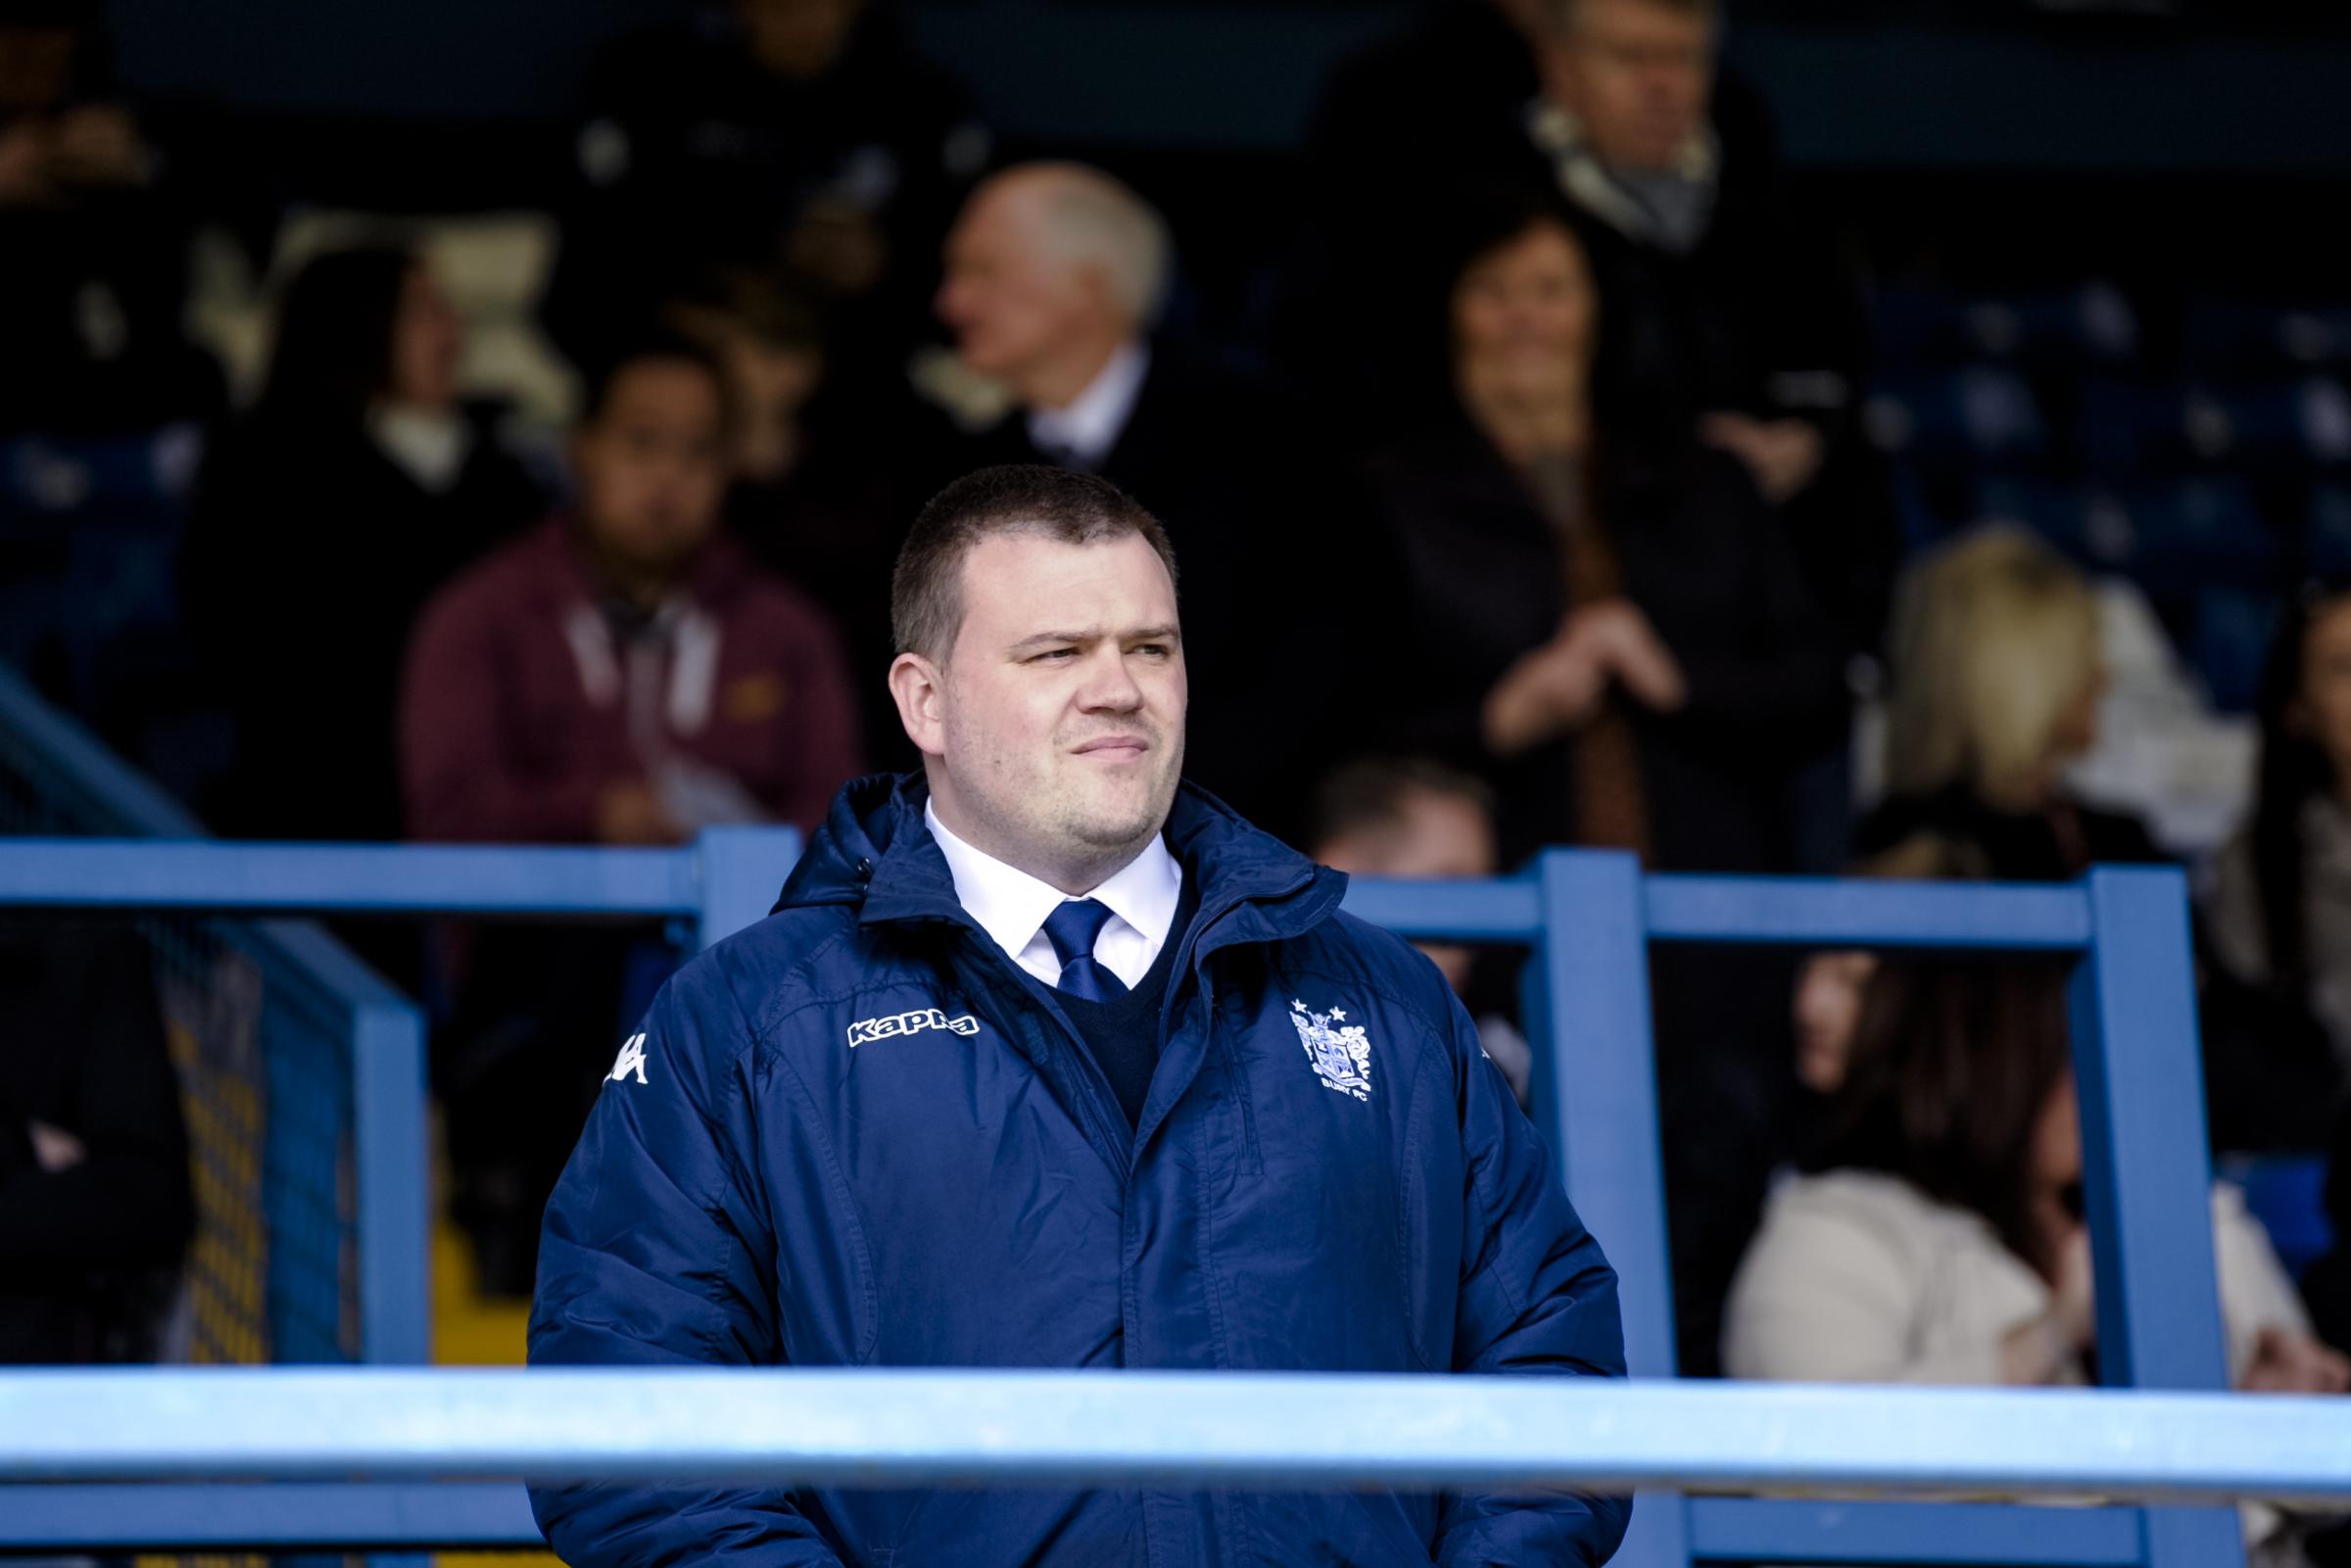 Bury FC announce new owner as Stewart Day steps down